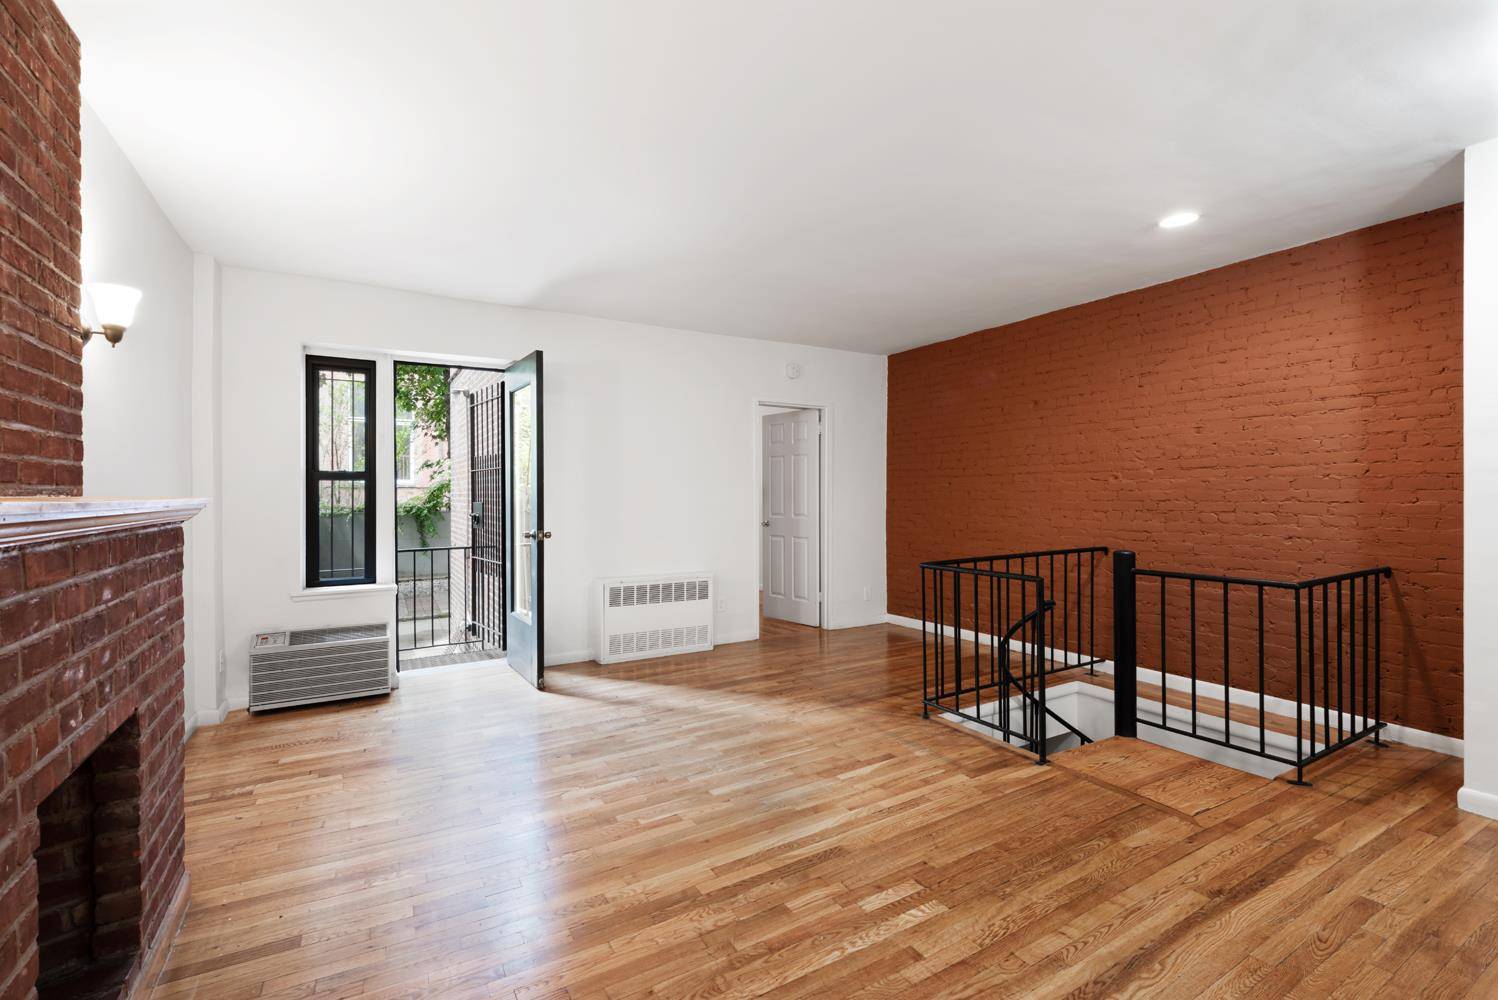 Possibilities abound in this classic Renaissance Revival townhouse.